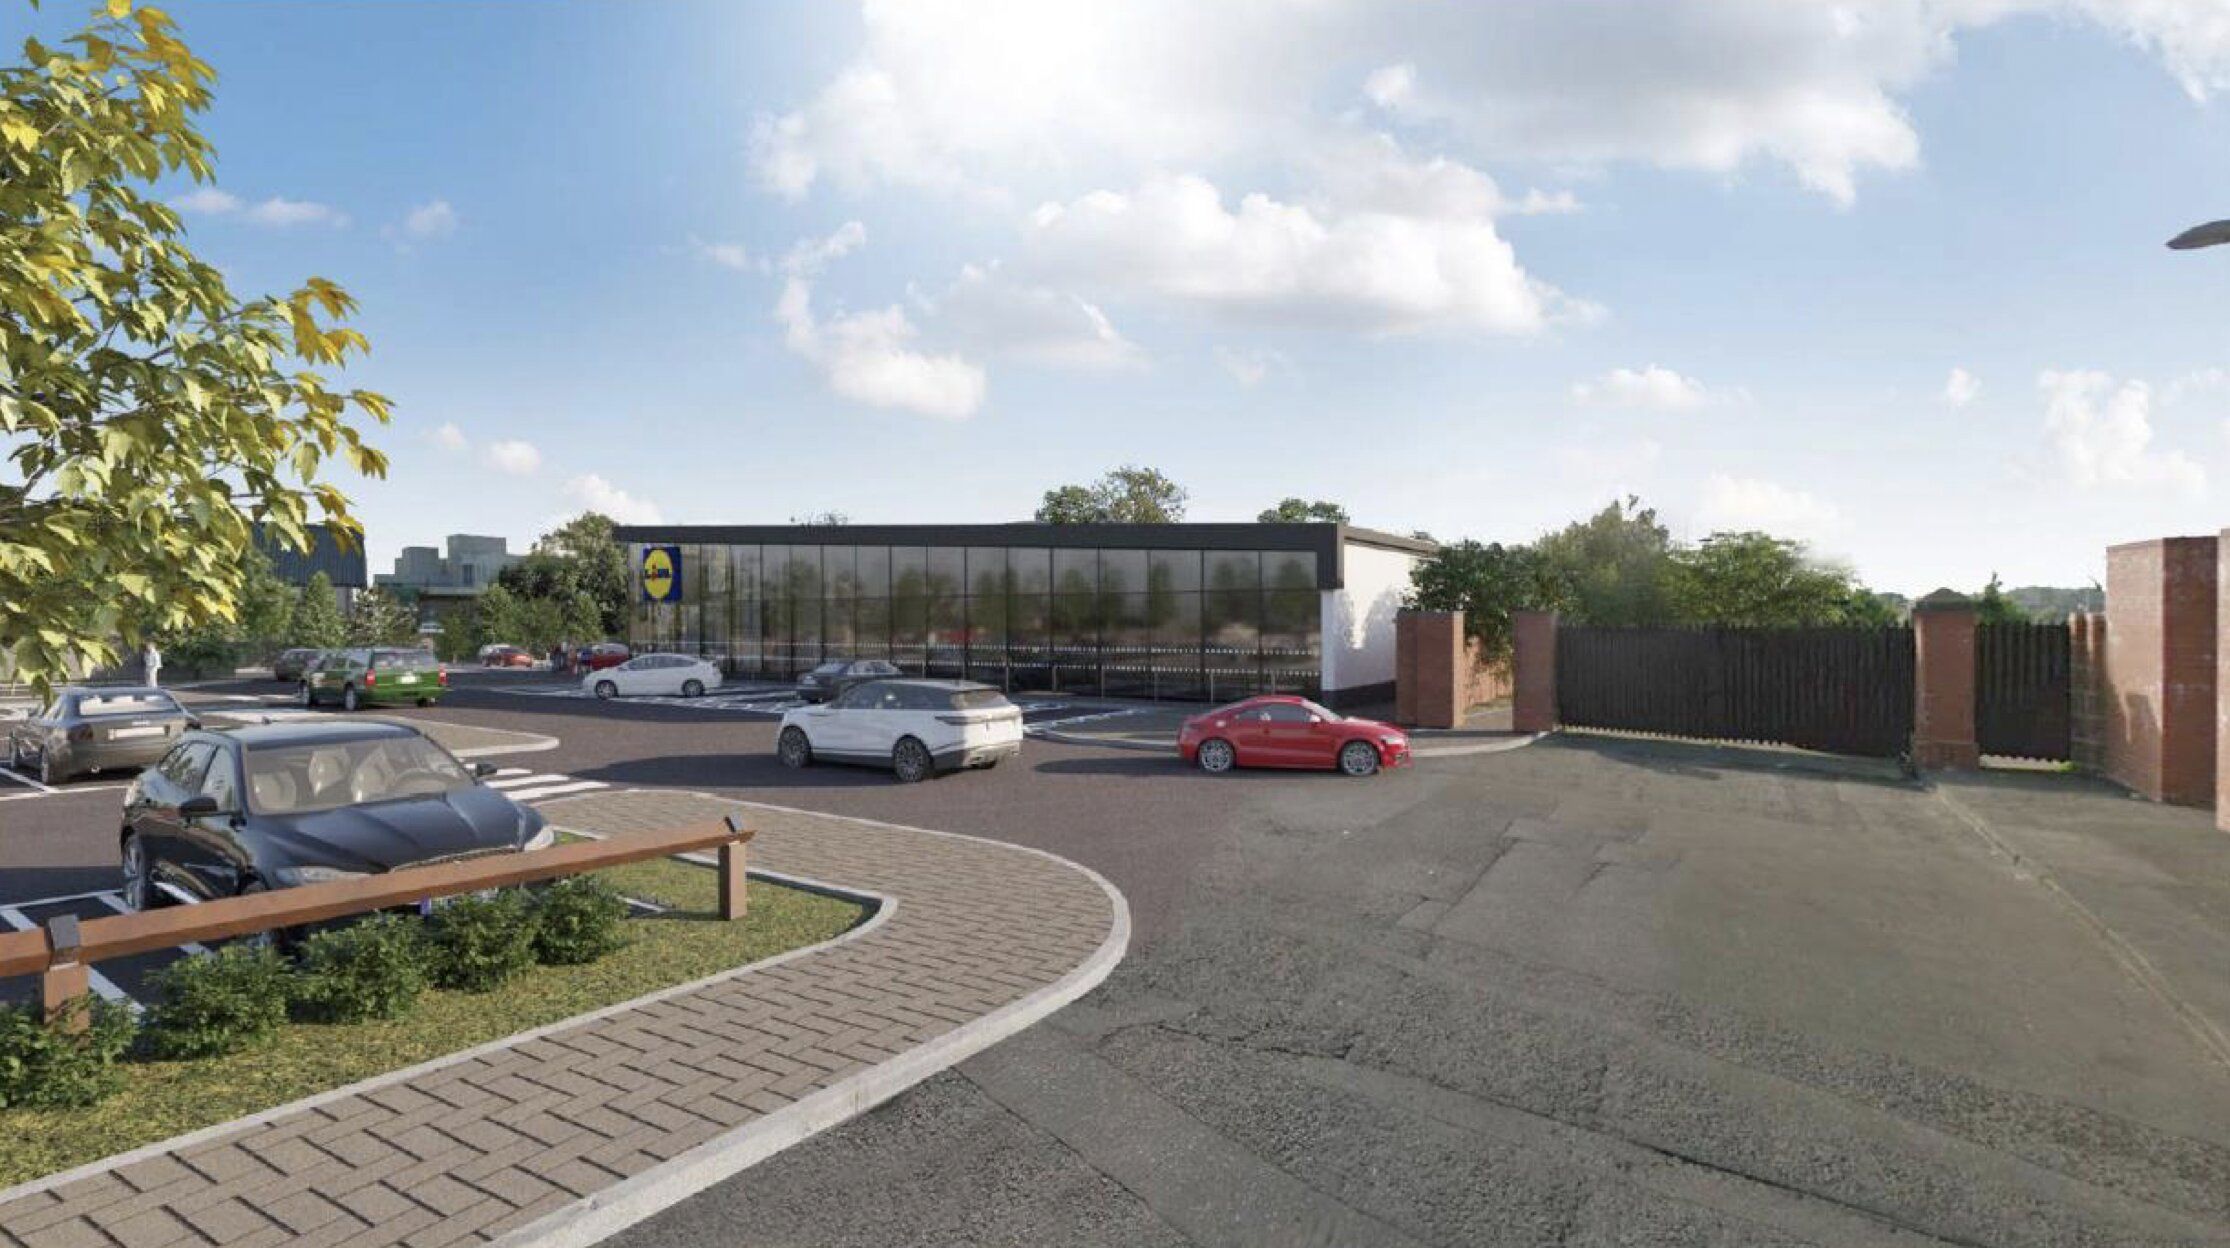 REDEVELOPMENT: Plans for the redevelopment of the Lidl store on Stewartstown Road have been approved by Belfast City Council. Above, how the store will look